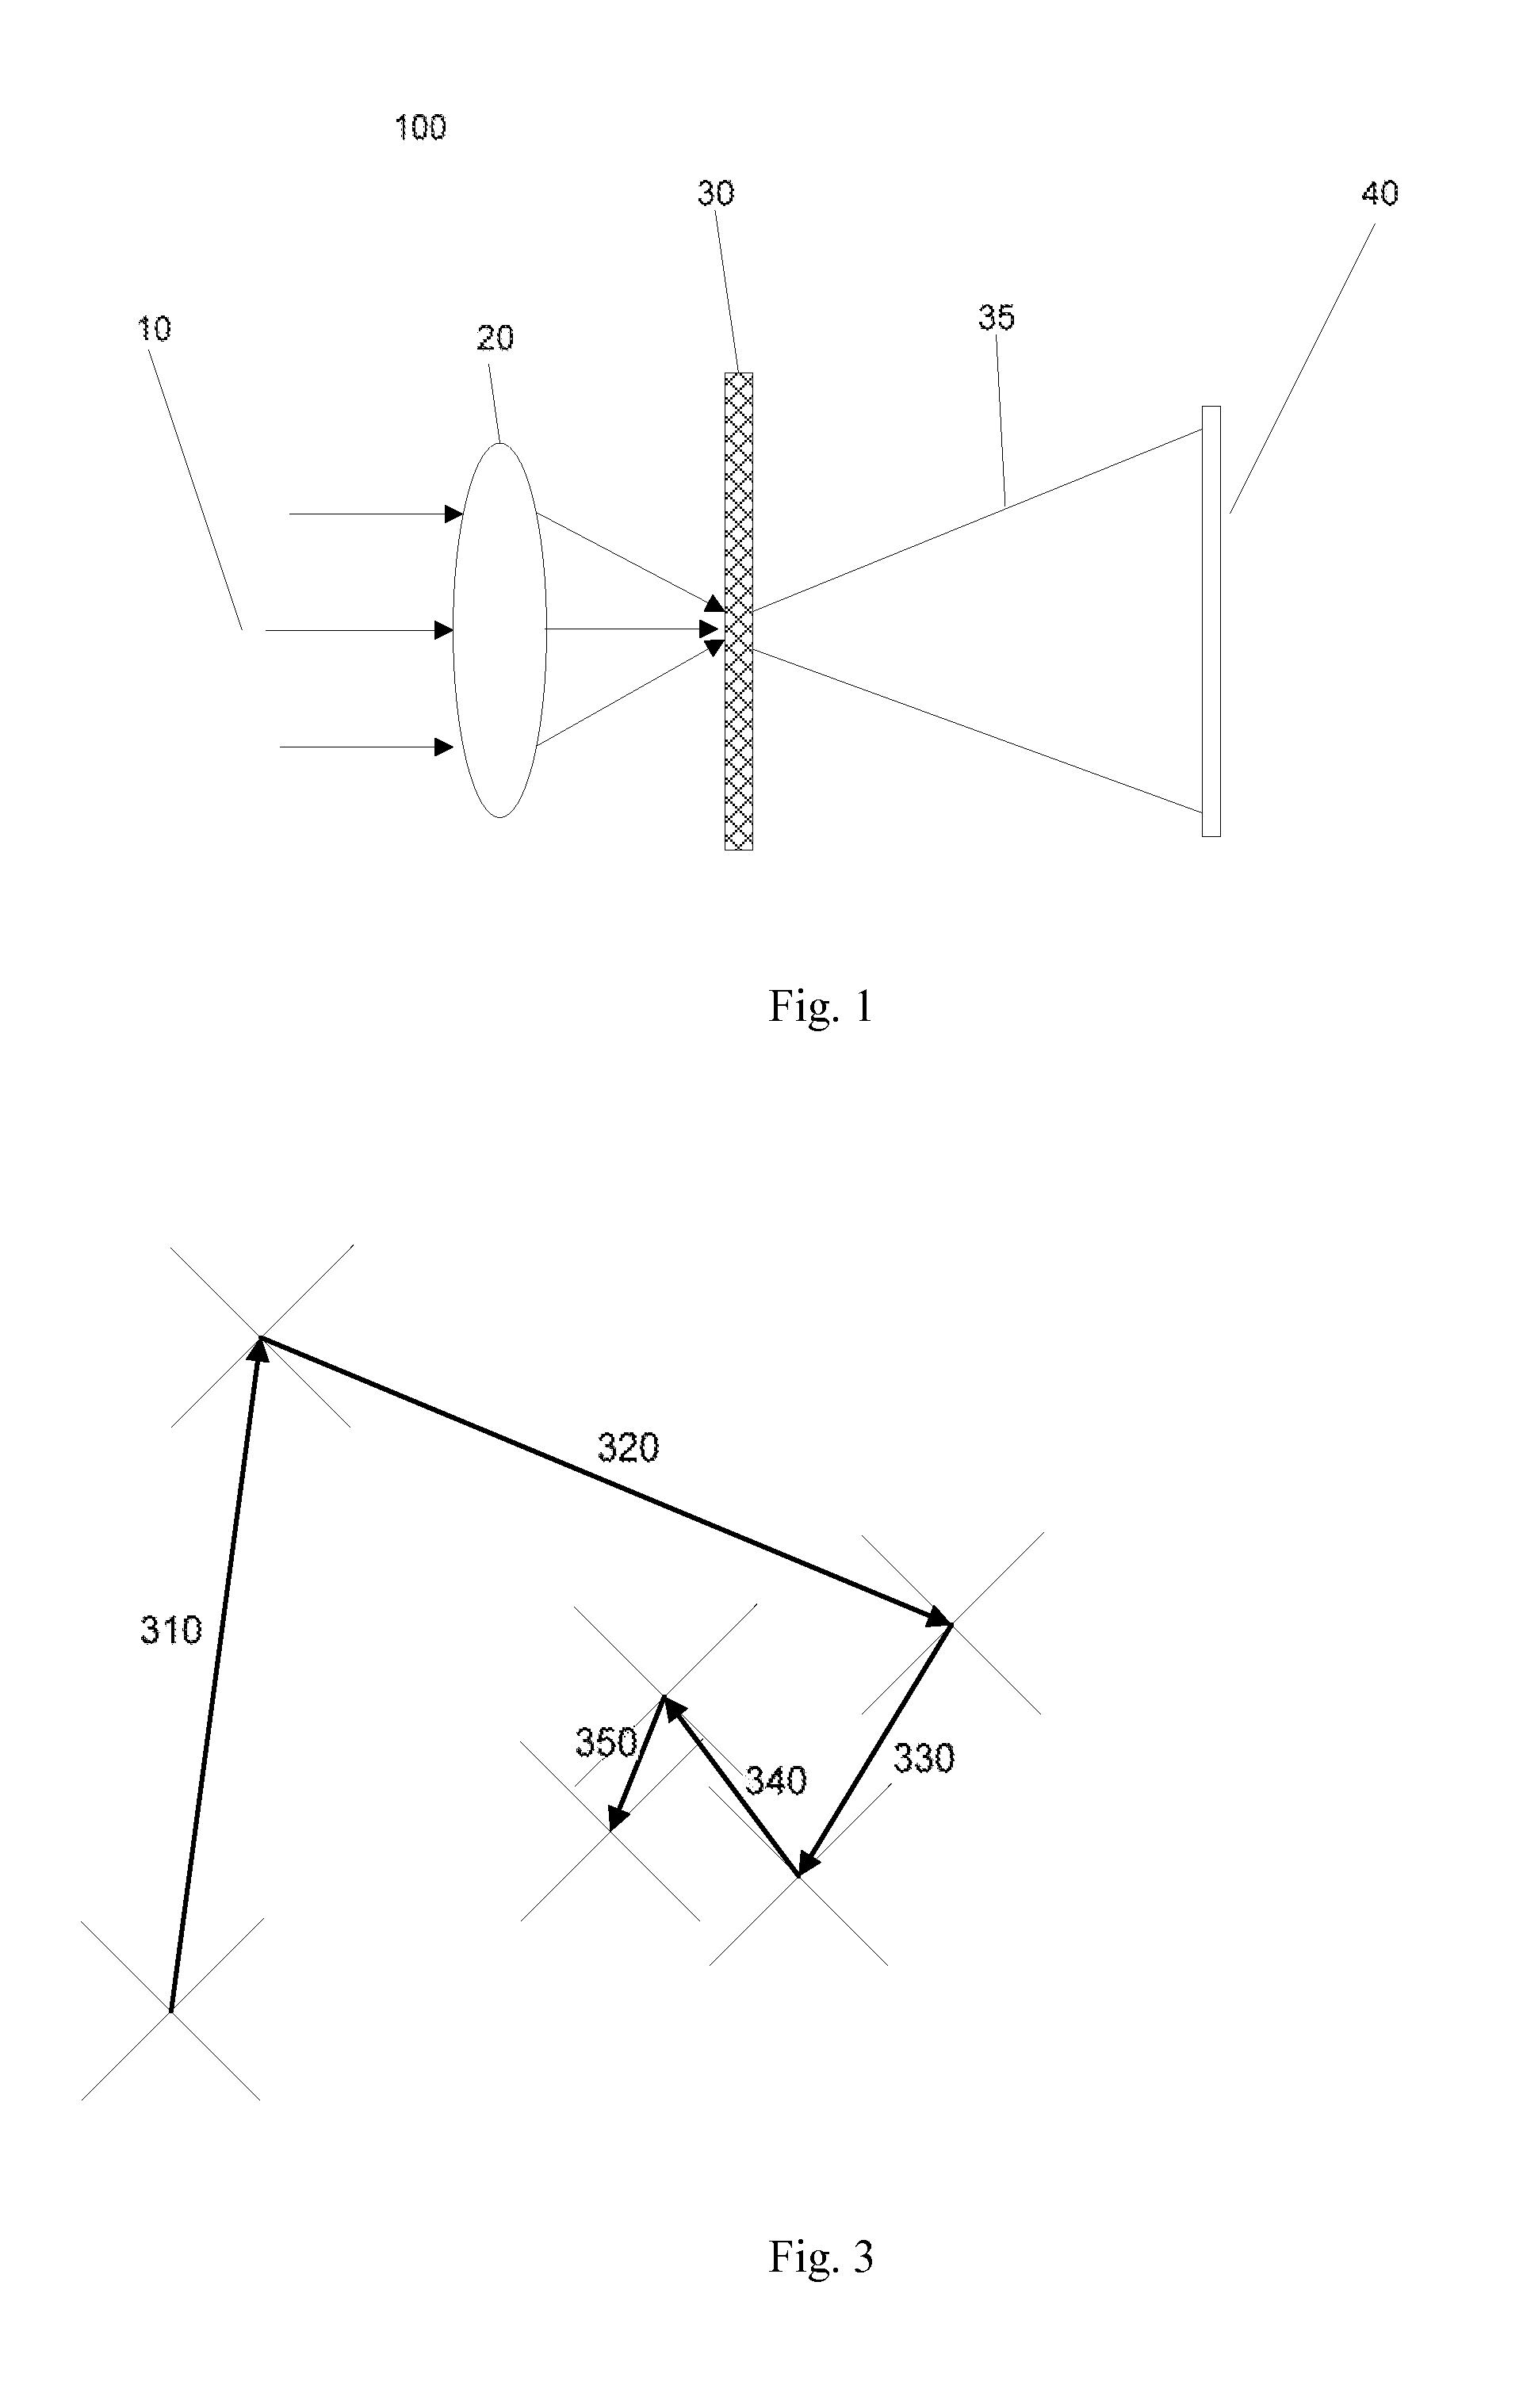 Method and apparatus for providing image data for constructing an image of a region of a target object